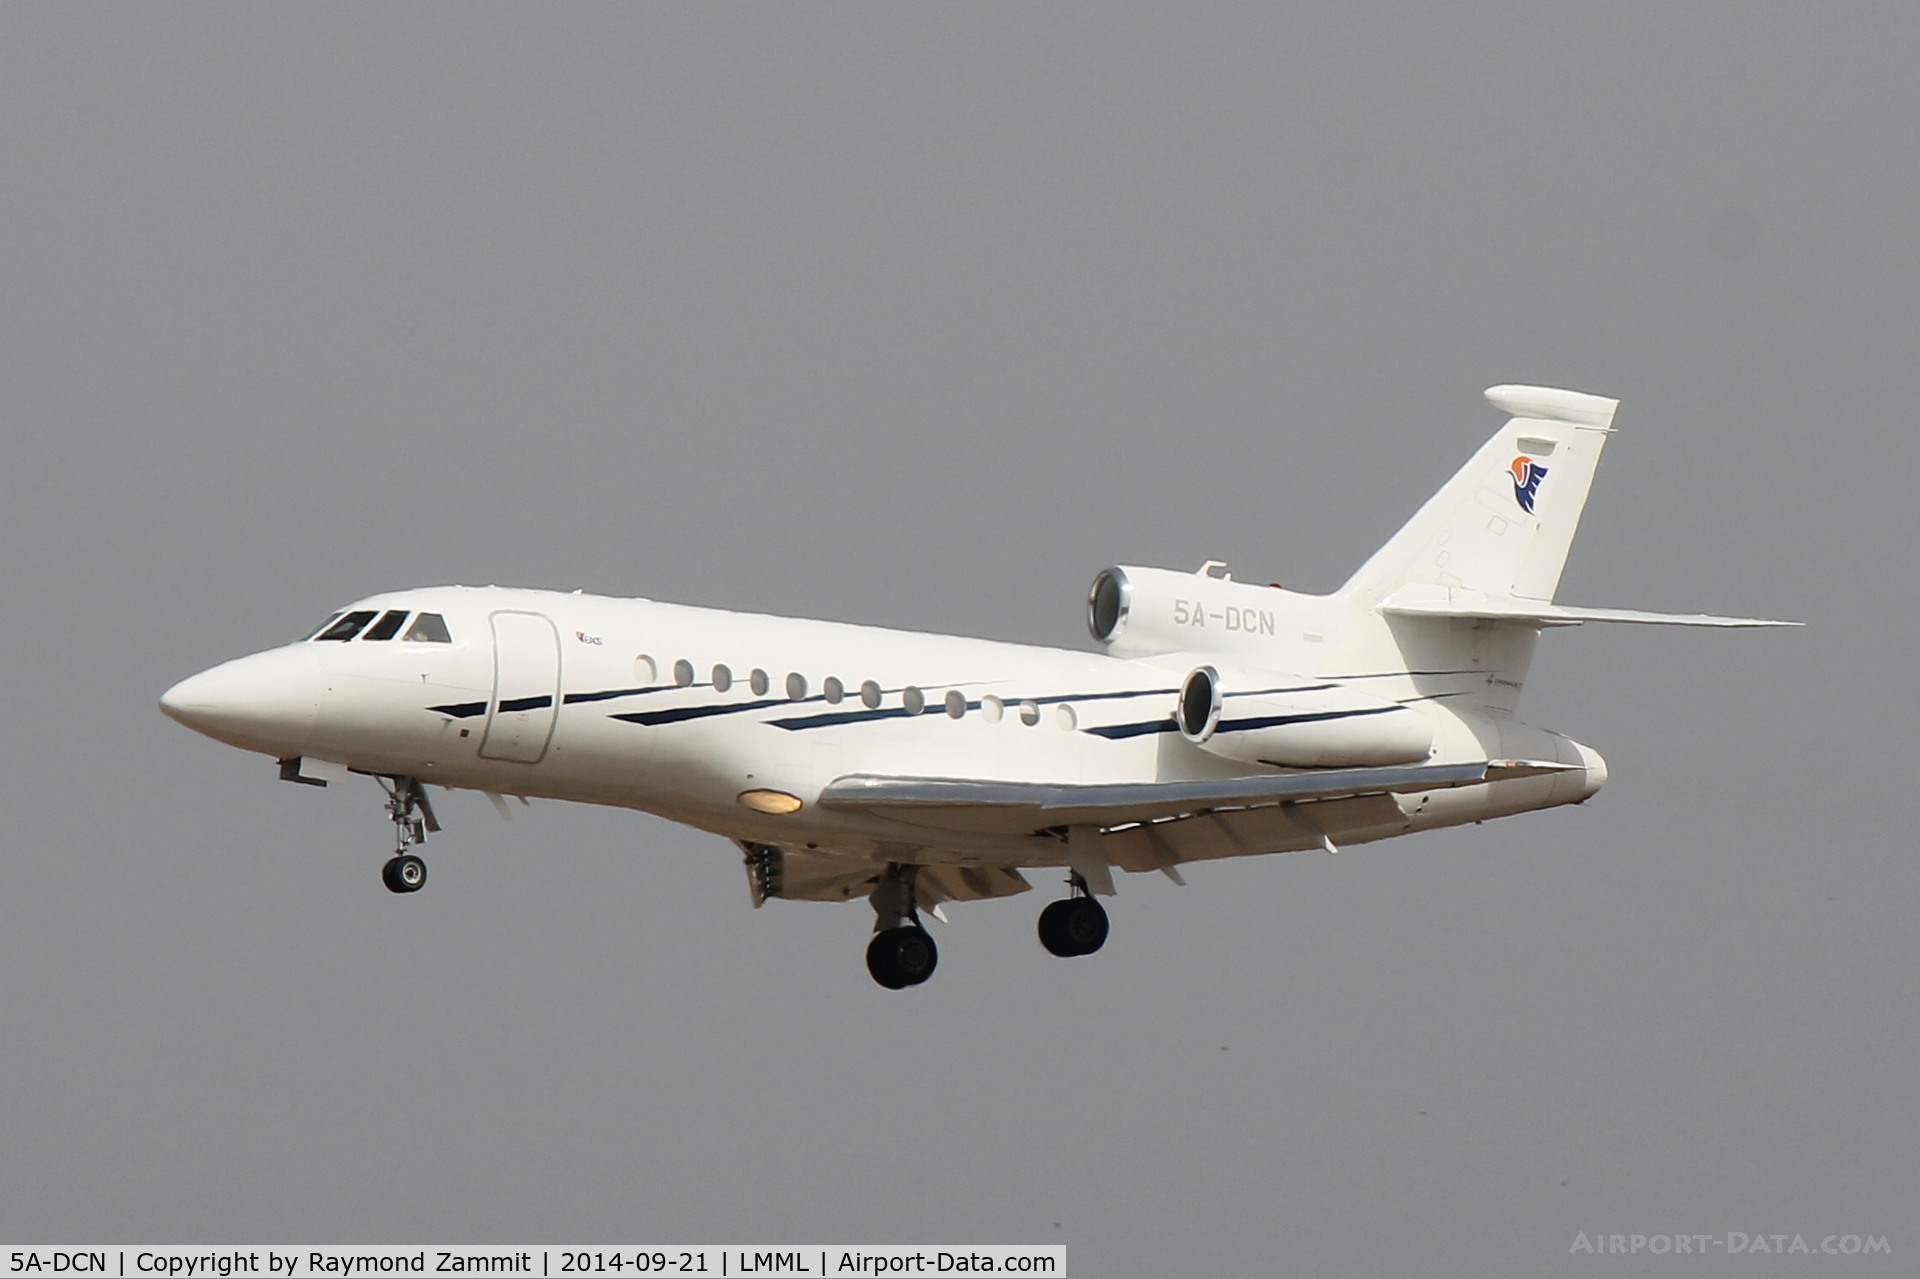 5A-DCN, 2005 Dassault Falcon 900EX C/N 148, Dassault Falcon 900 5A-DCN operated by the Libyan Government.